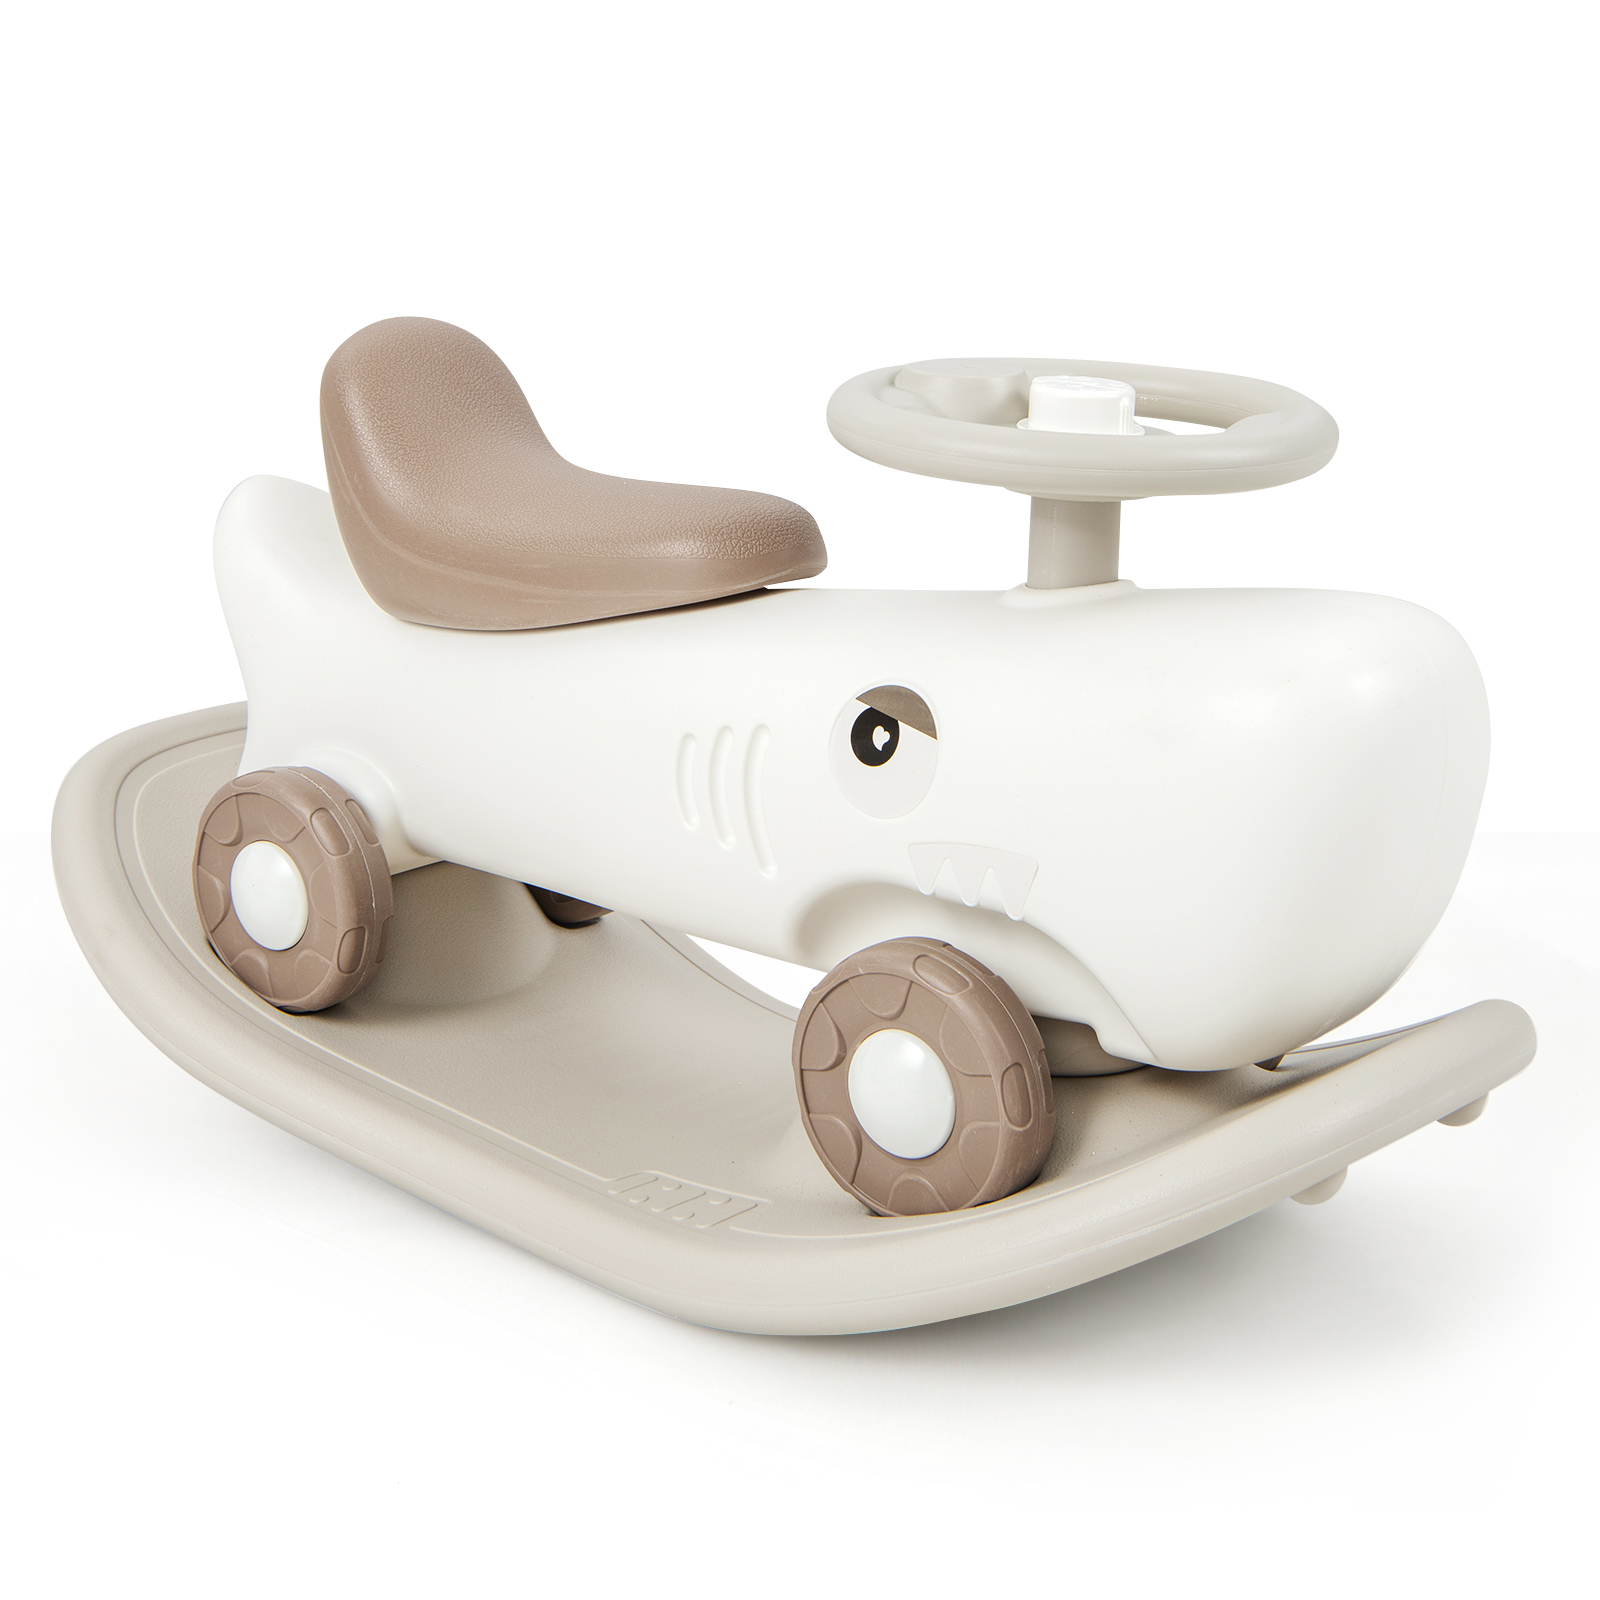 Kids 3-in-1 Convertible Rocking Horse and Sliding Car for Indoor Outdoor Use-White